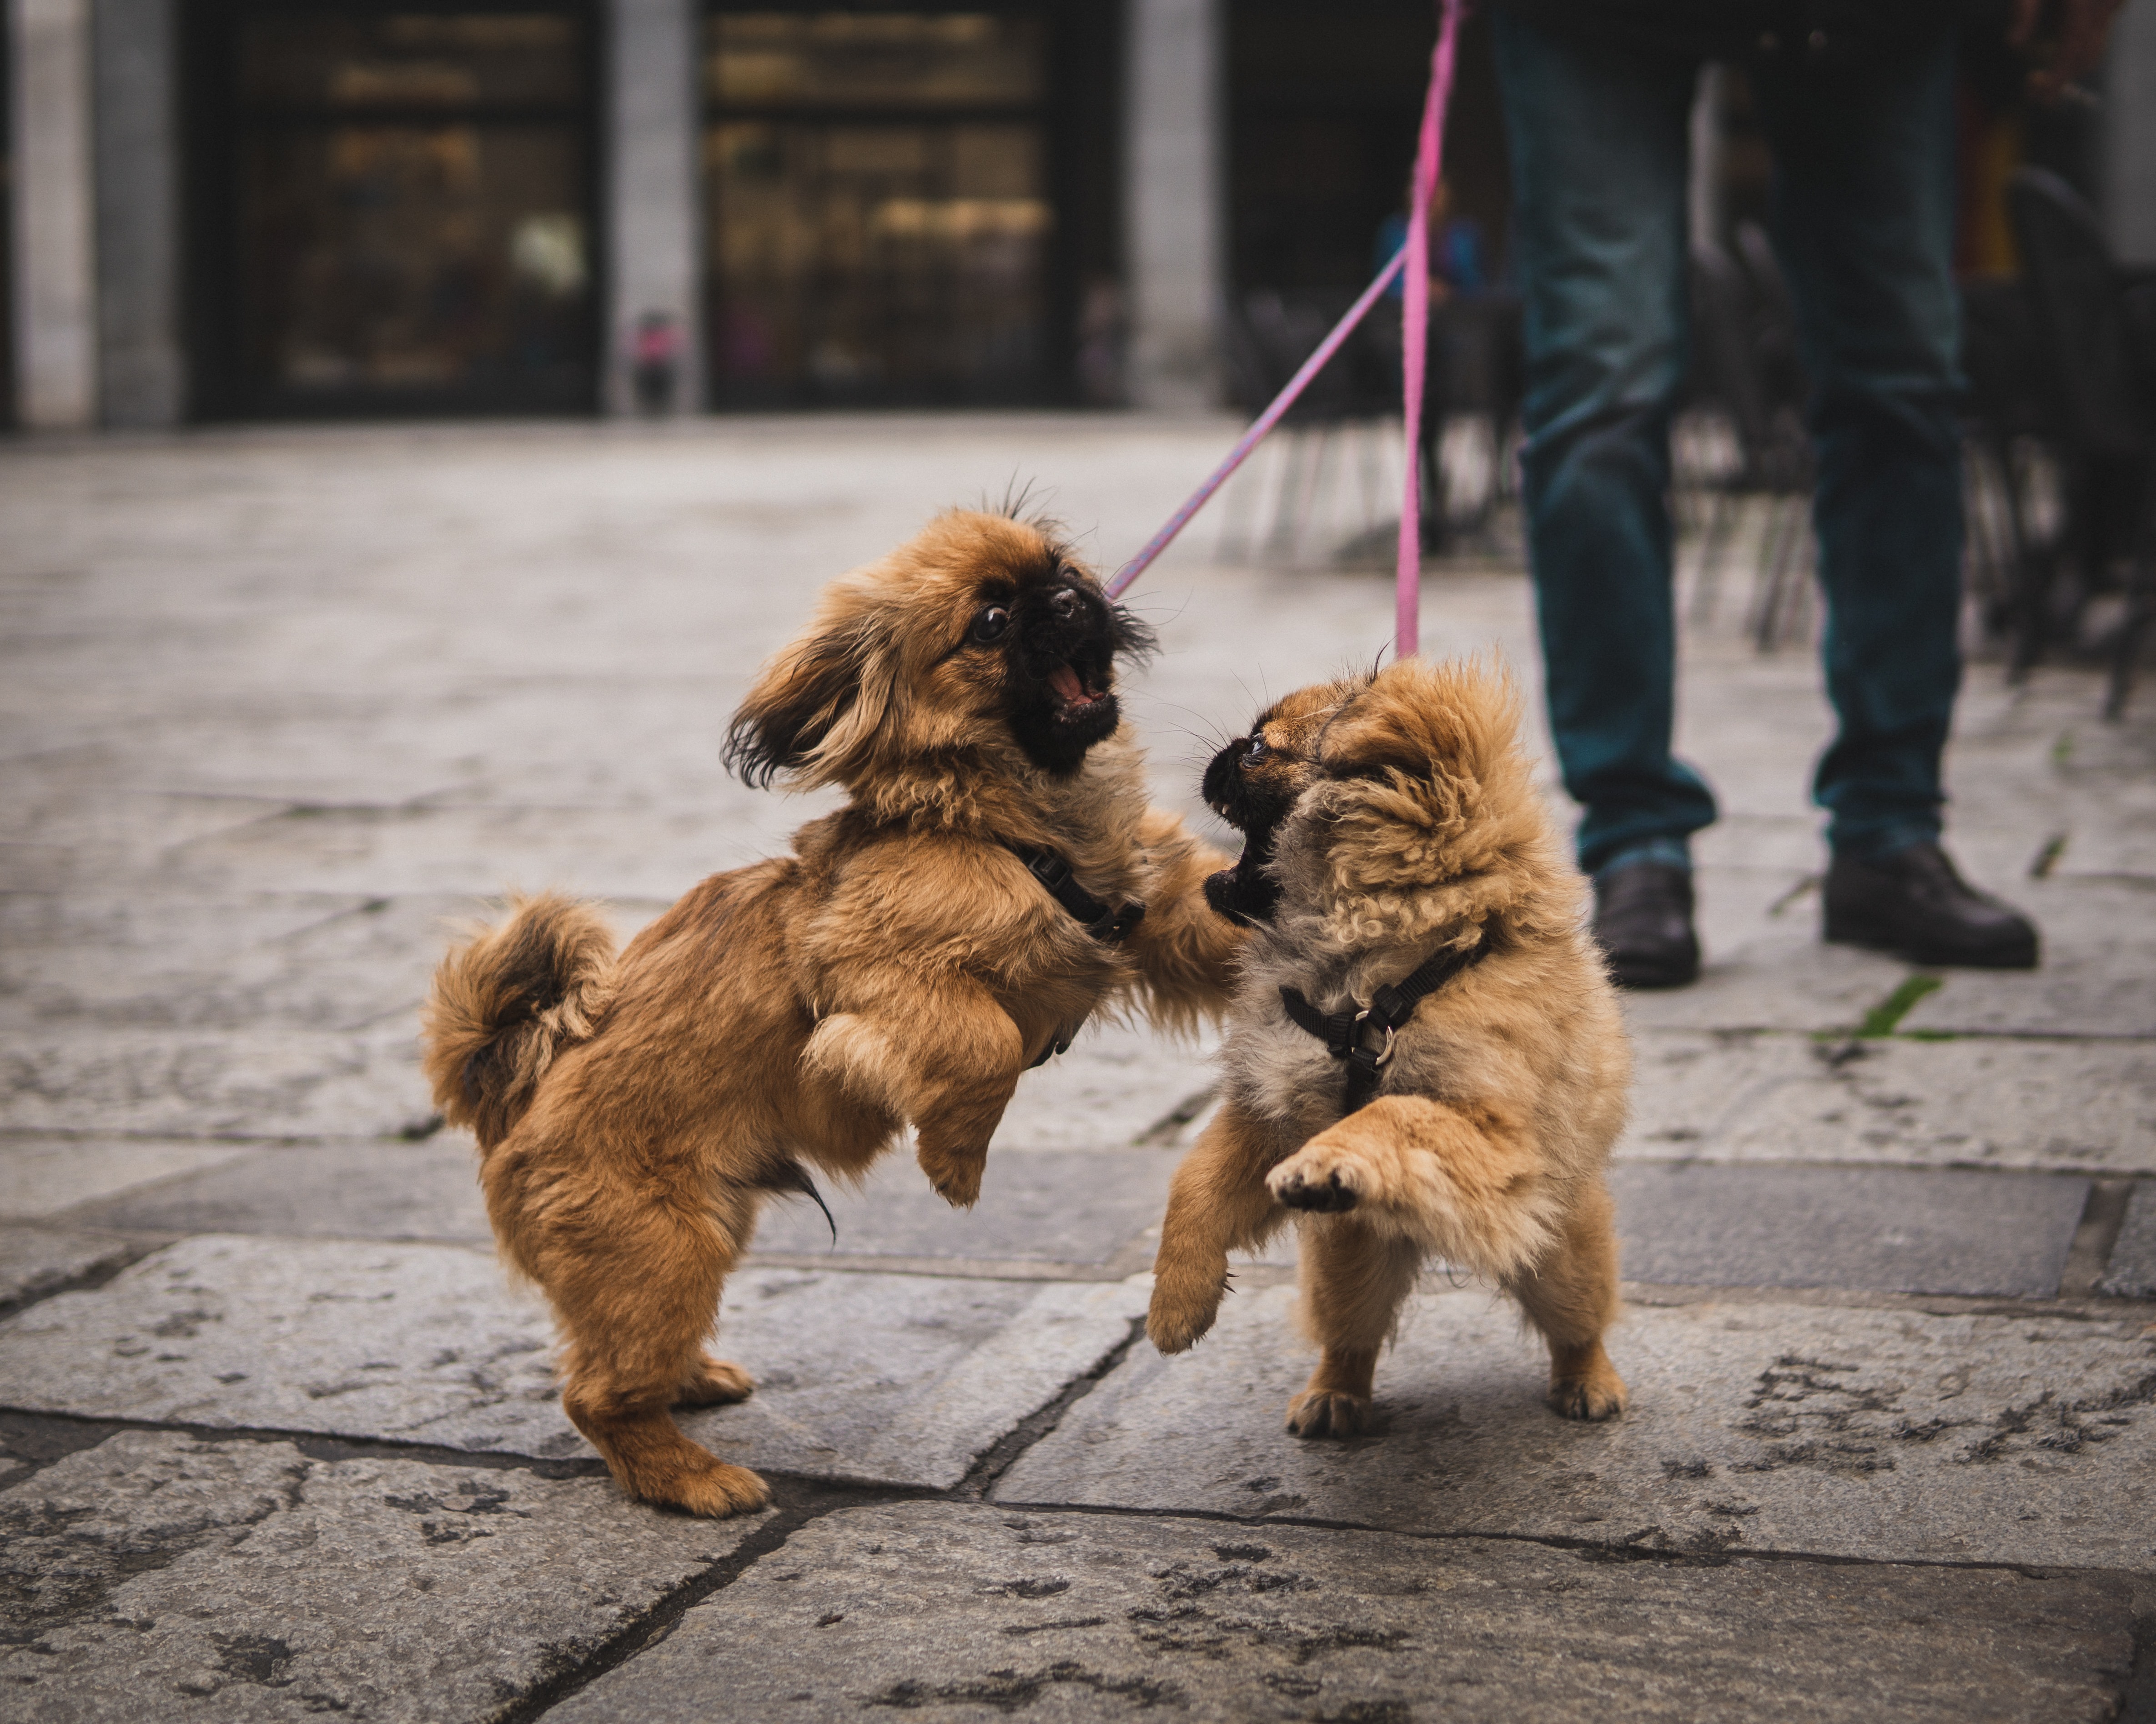 two dogs fighting while on leash